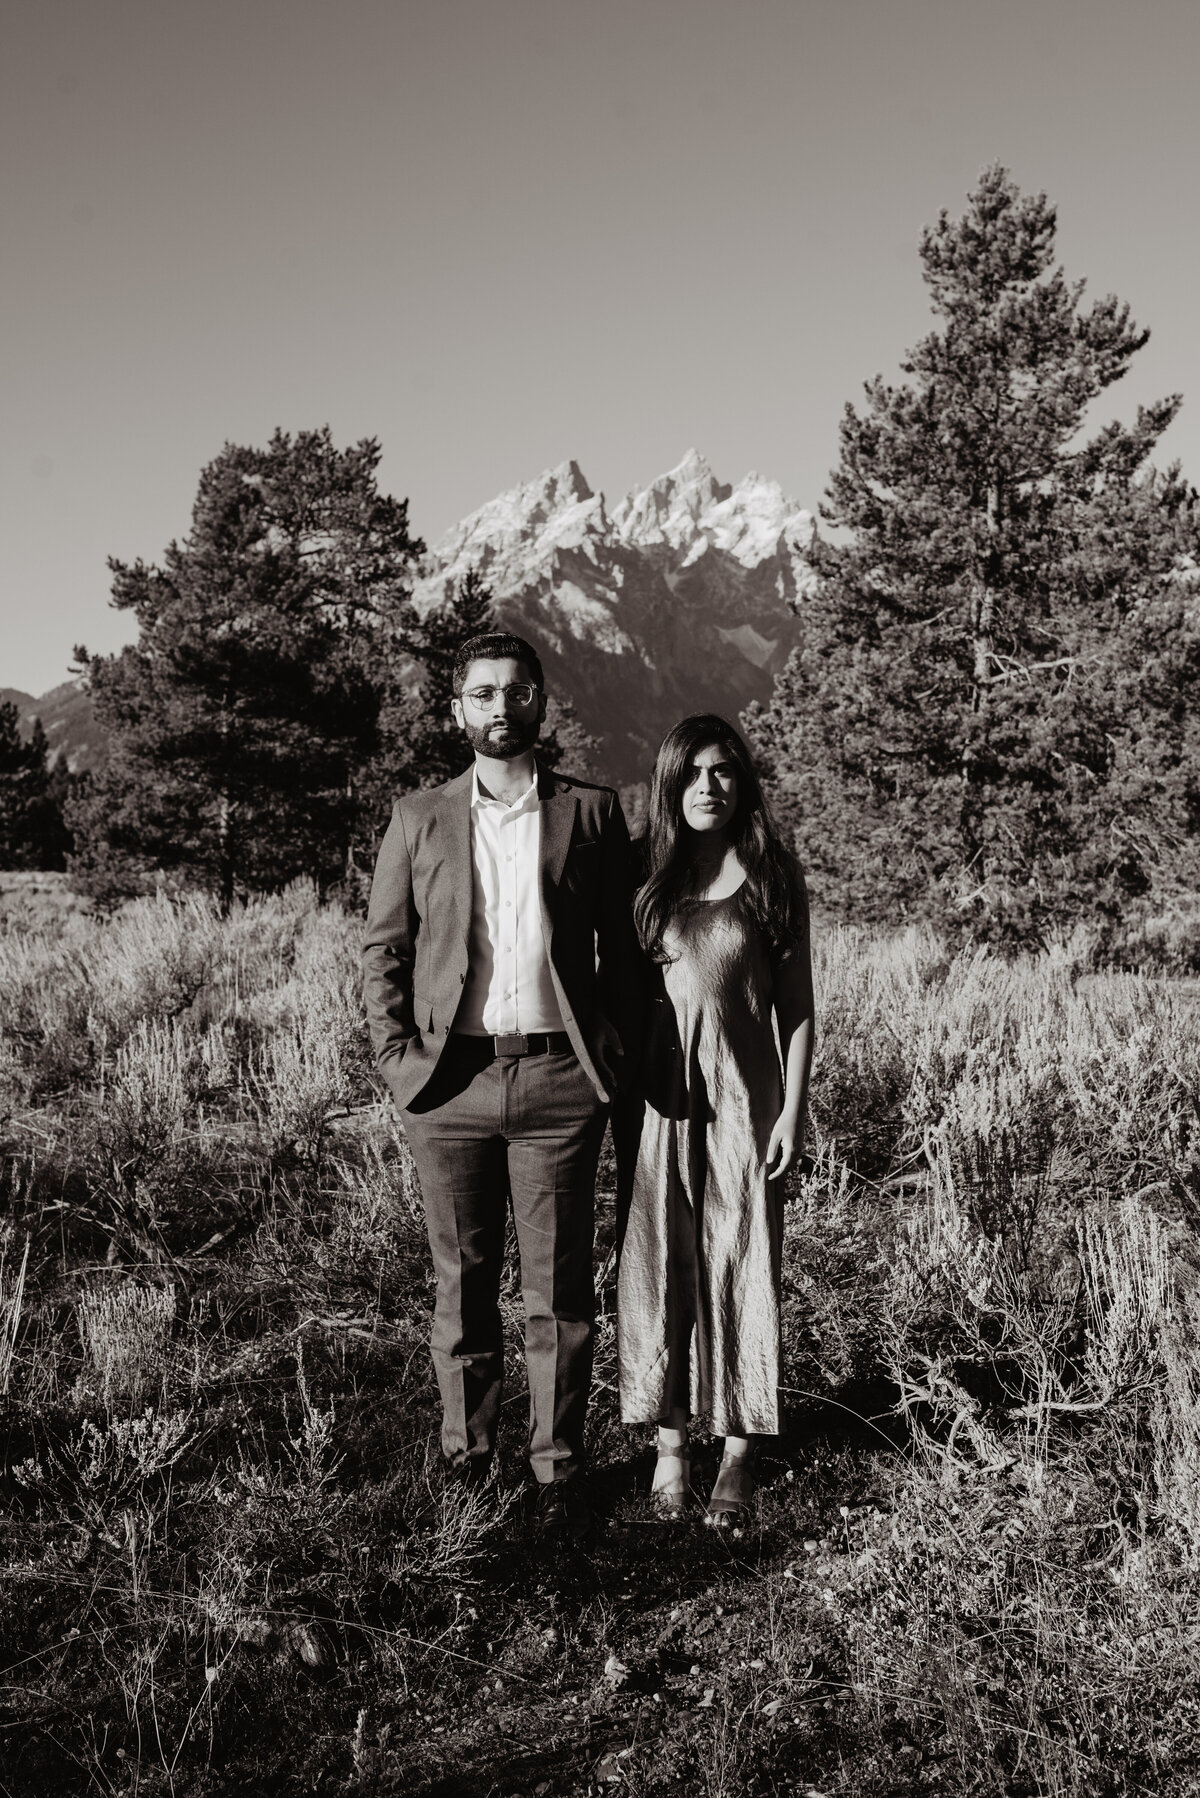 black and white photo of an engagement session in Jackson Hole during the fall with the man and woman in formal attire posing next to each other